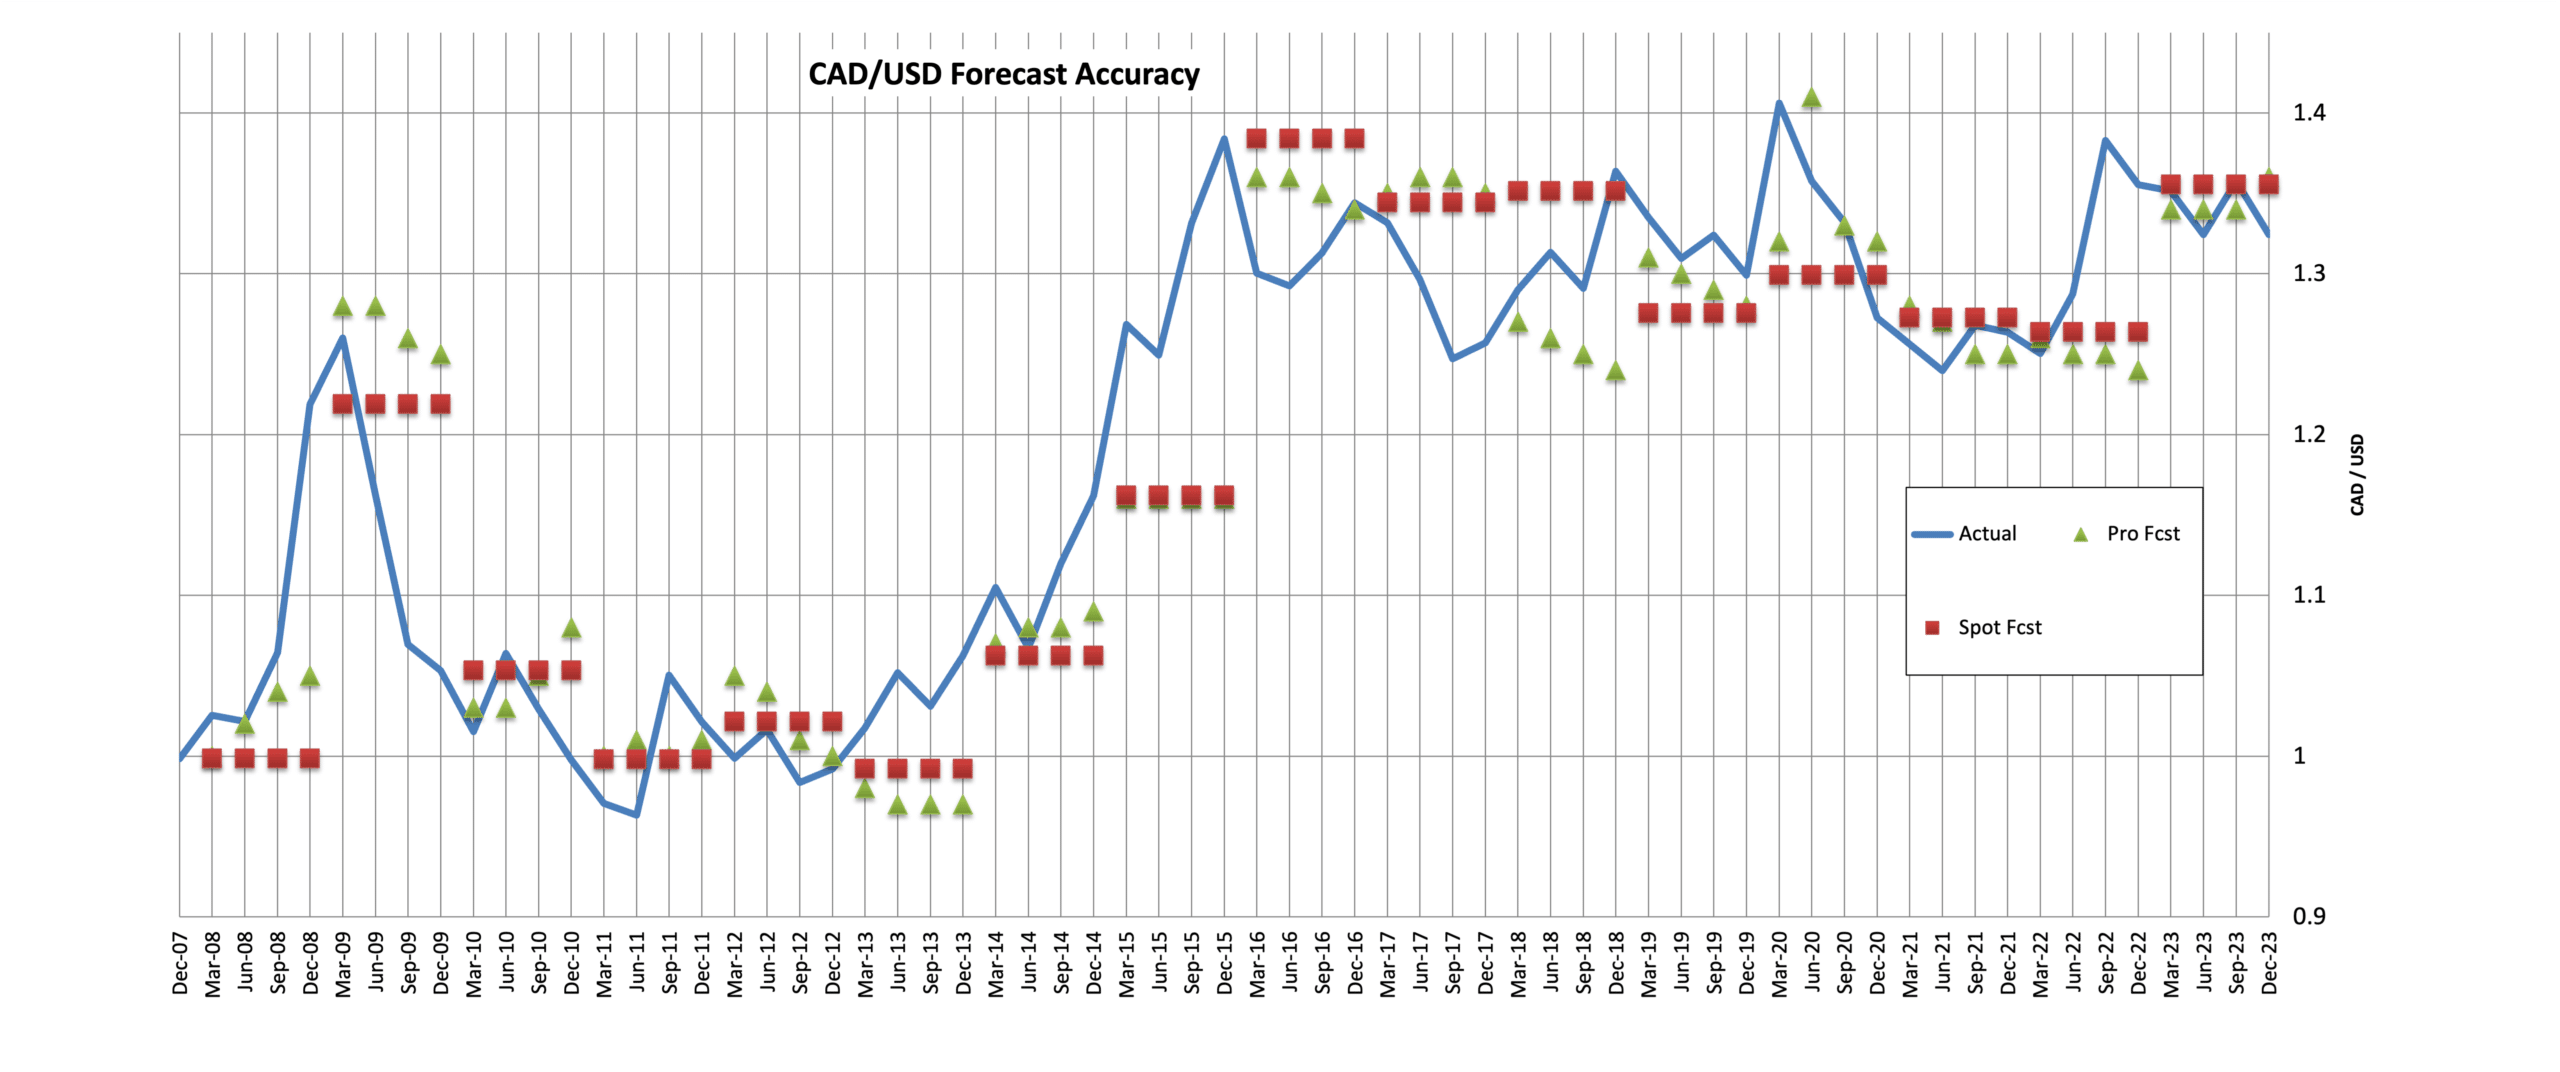 A chart showing the cumulative gdp forecast for canada.